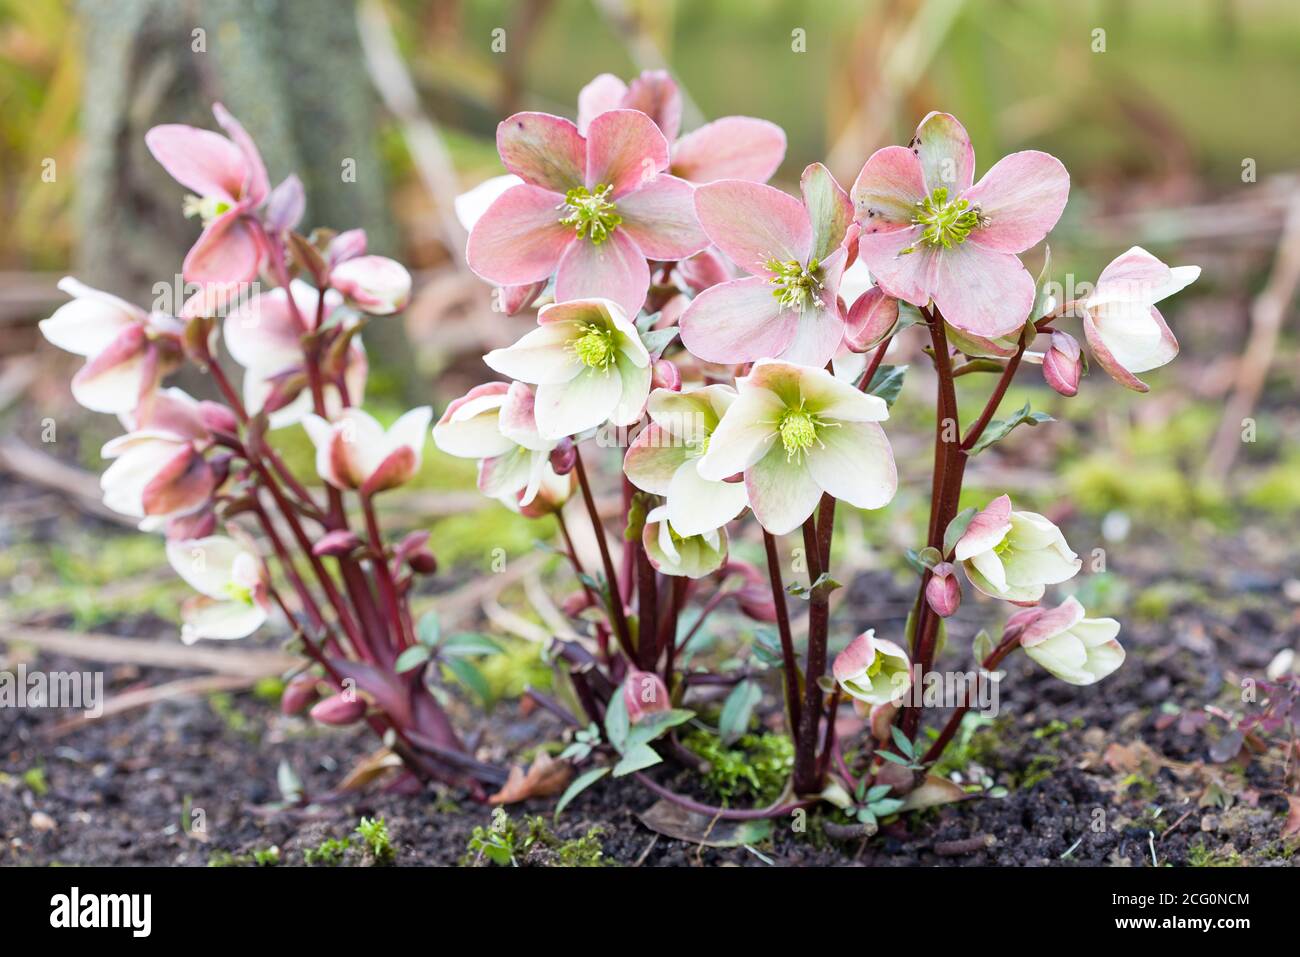 Pink and white winter rose, Christmas rose or hellebore, Helleborus Niger plant growing in a garden, UK Stock Photo